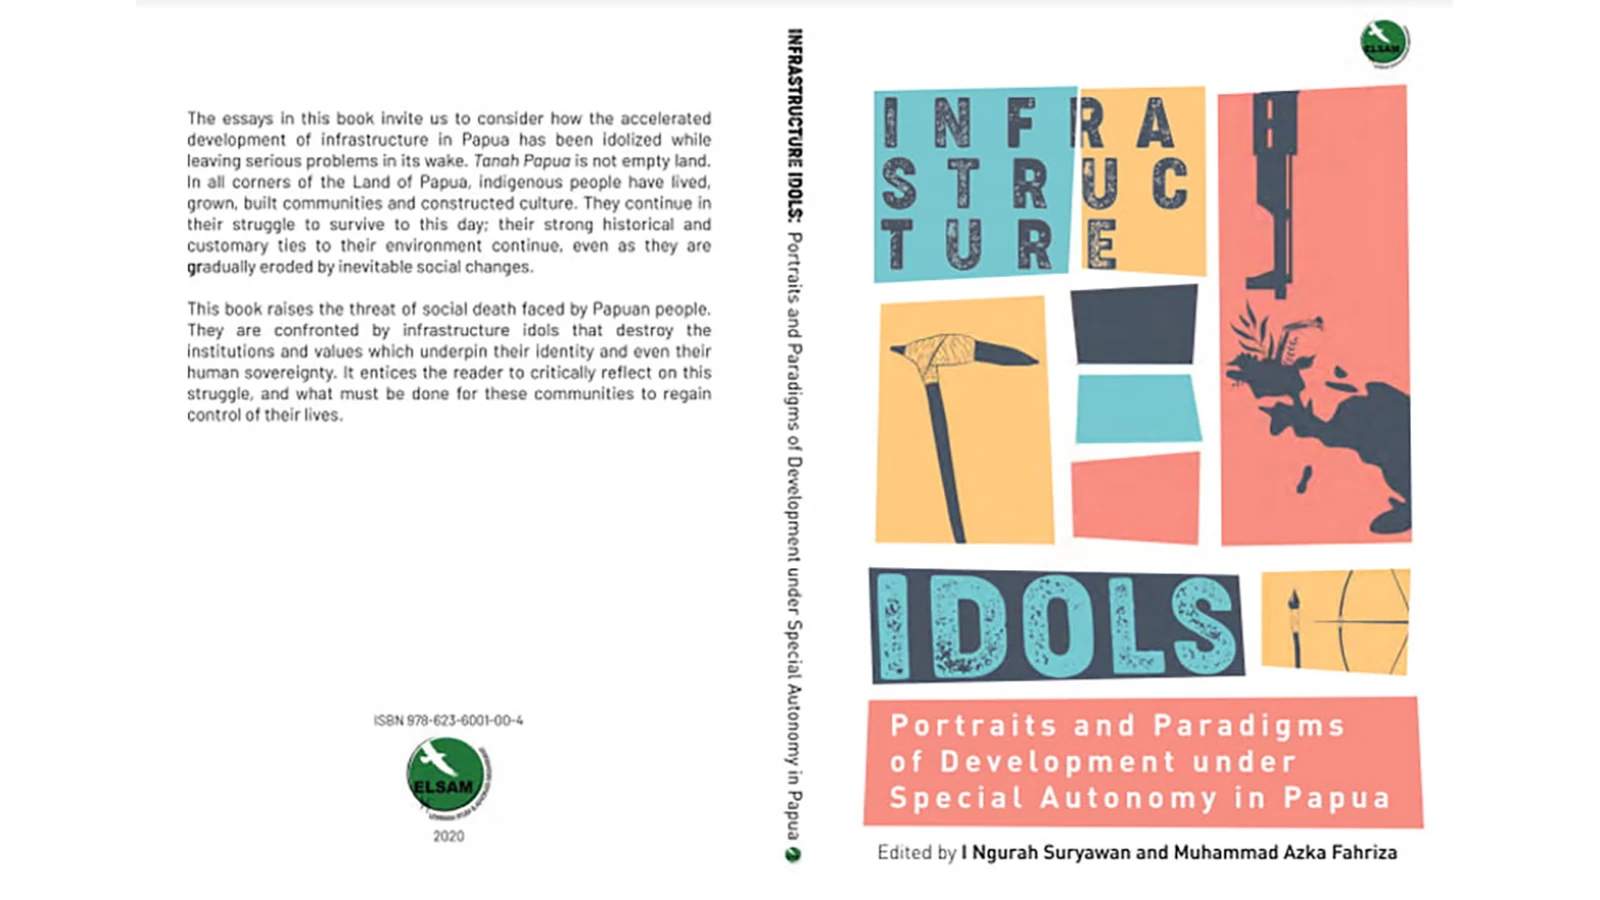 Infrastructure Idols: Portraits and Paradigms of Development under Special Autonomy in Papua